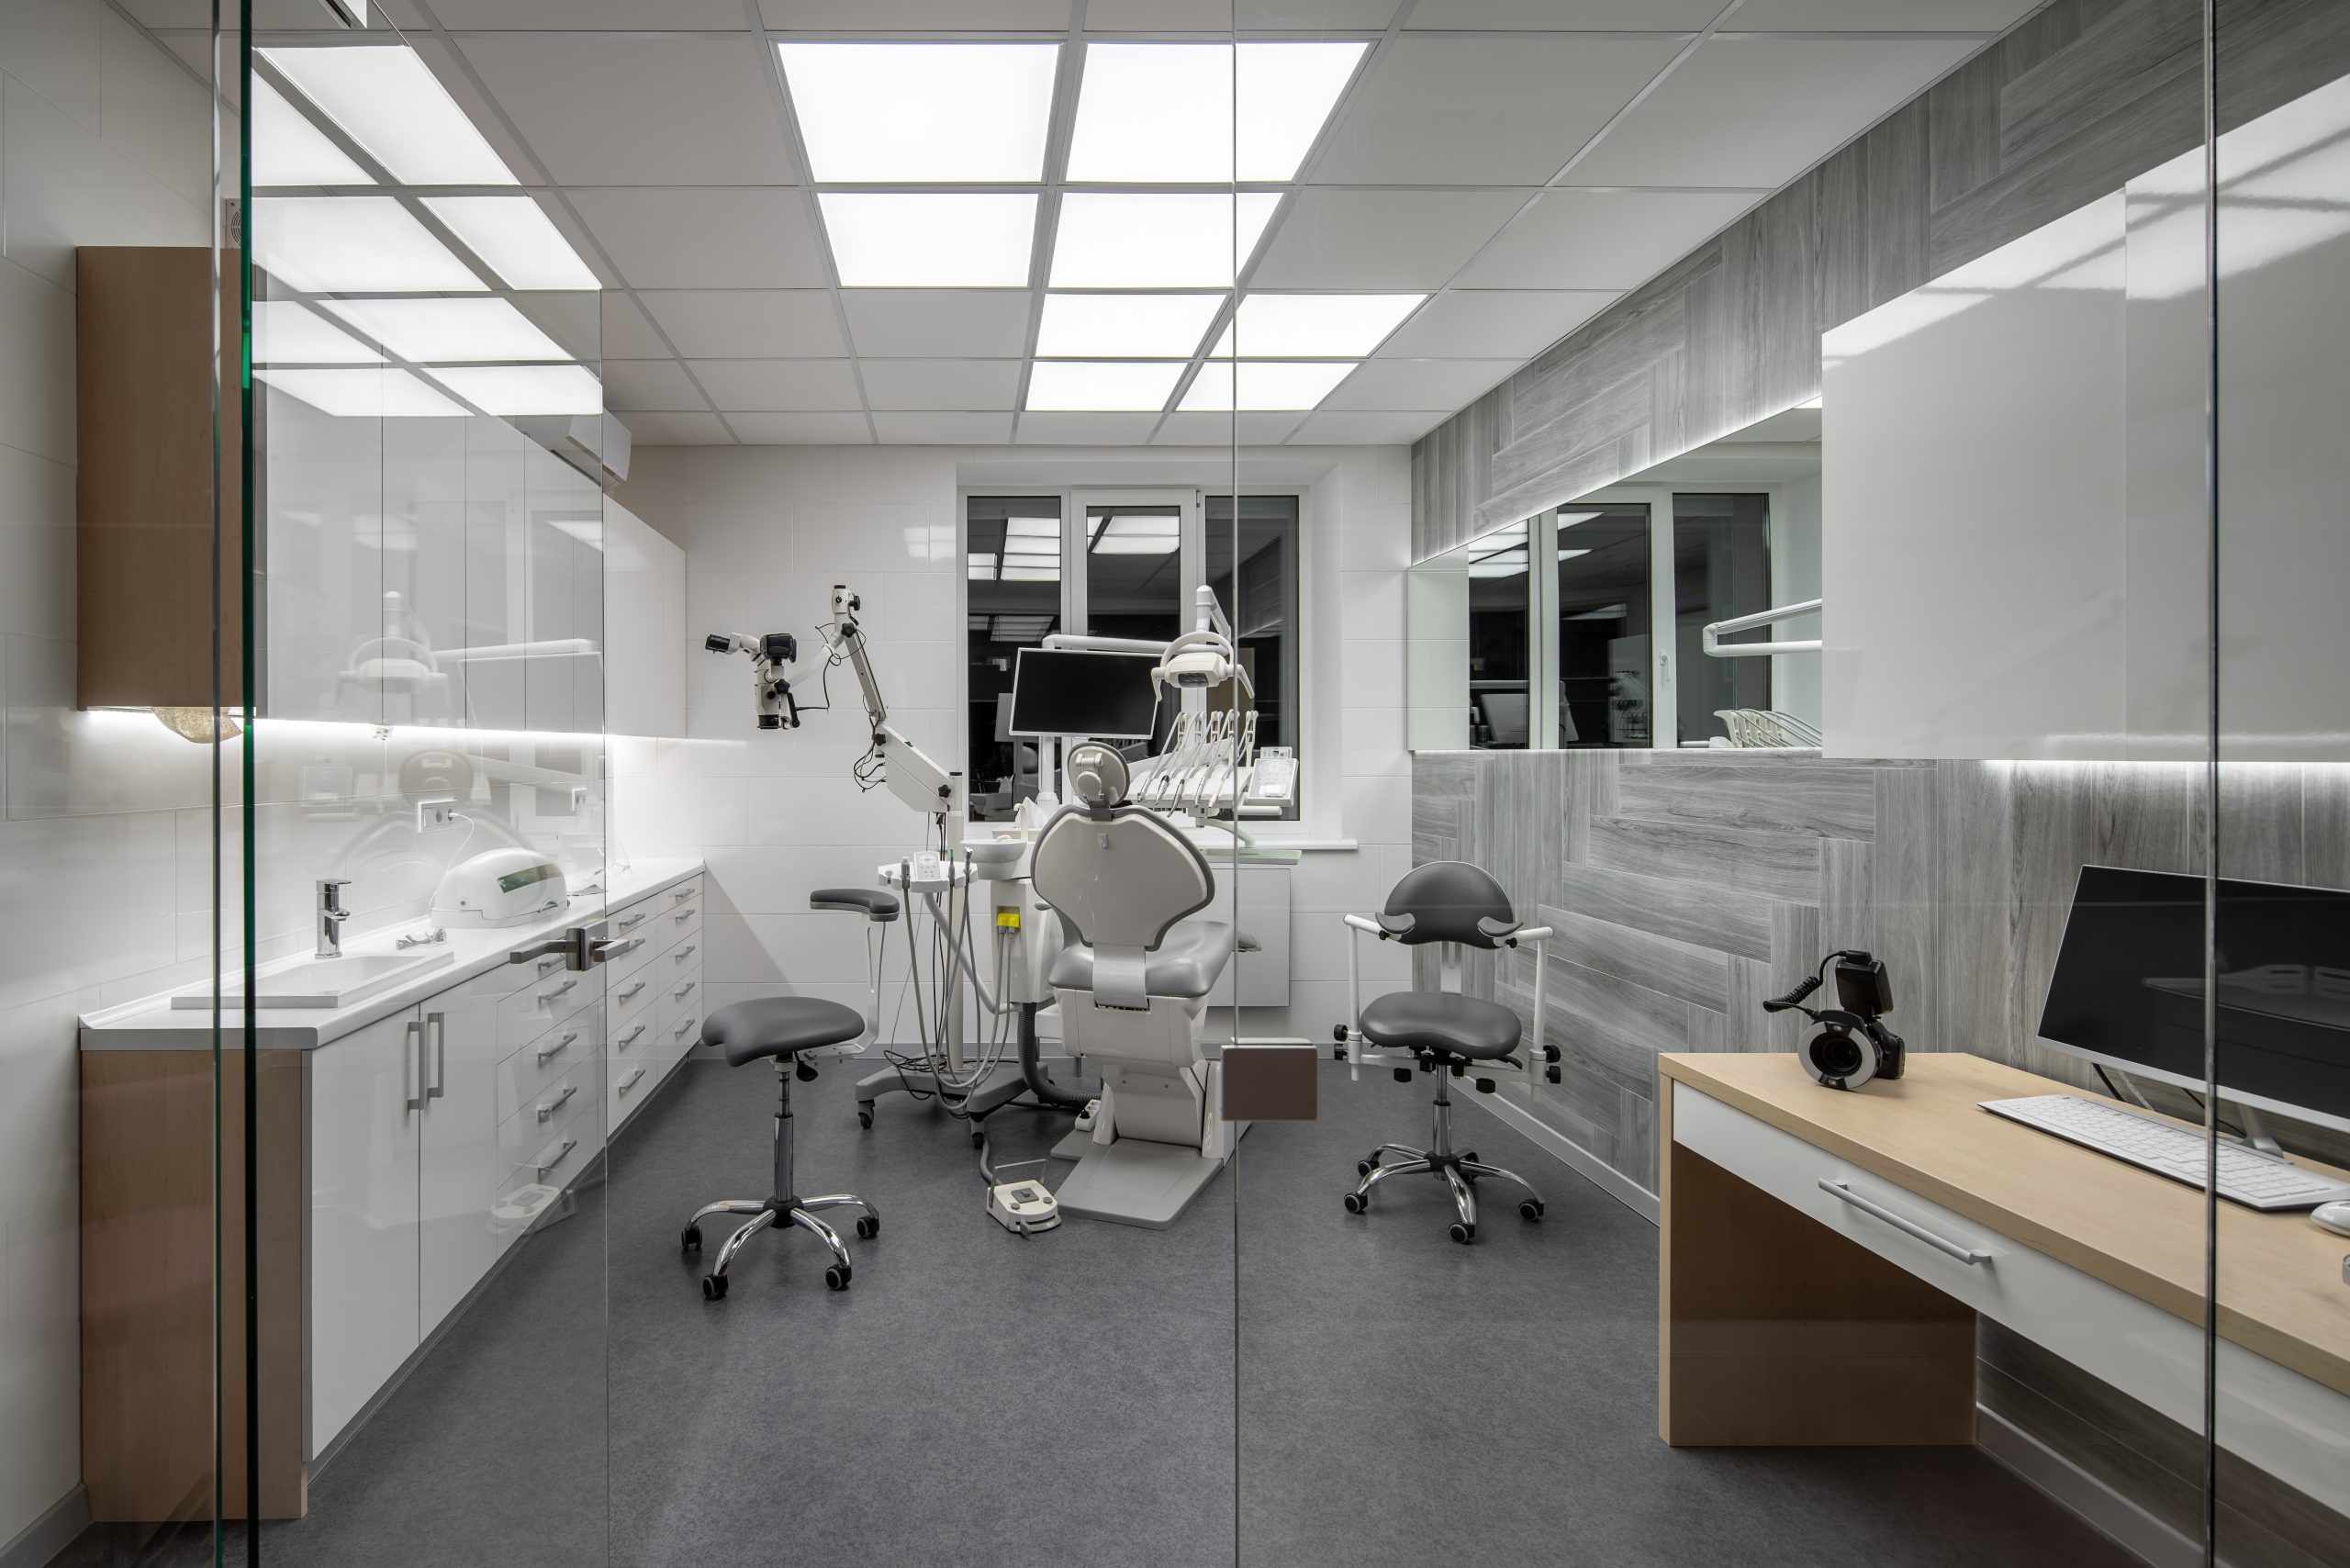 6-medical-clinic-interior-design-ideas-for-comfort-beauty